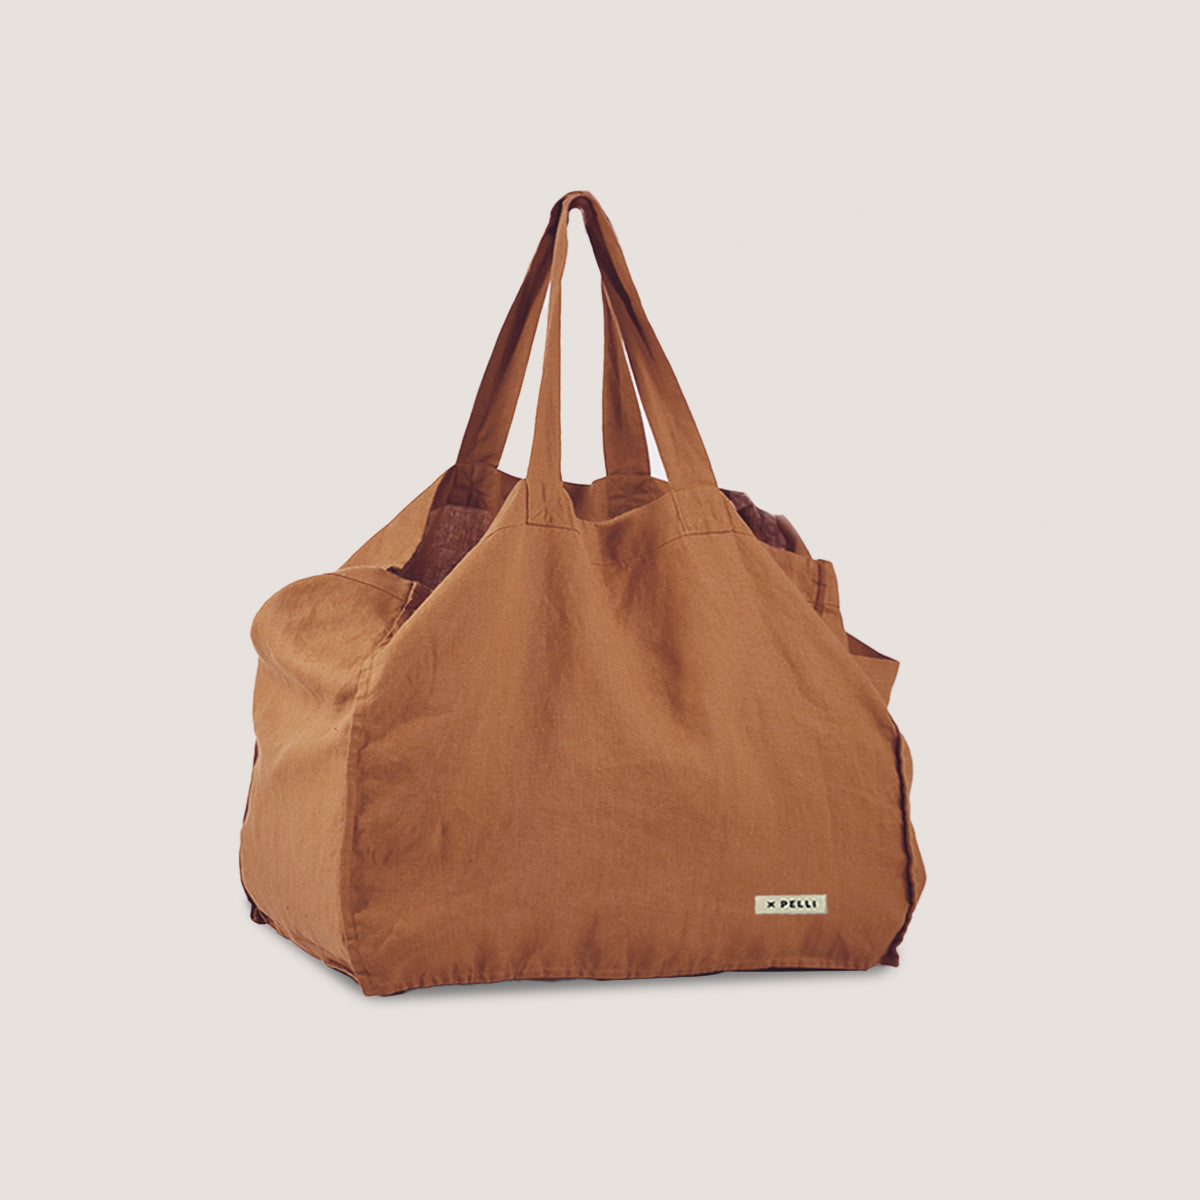 french linen tote bag